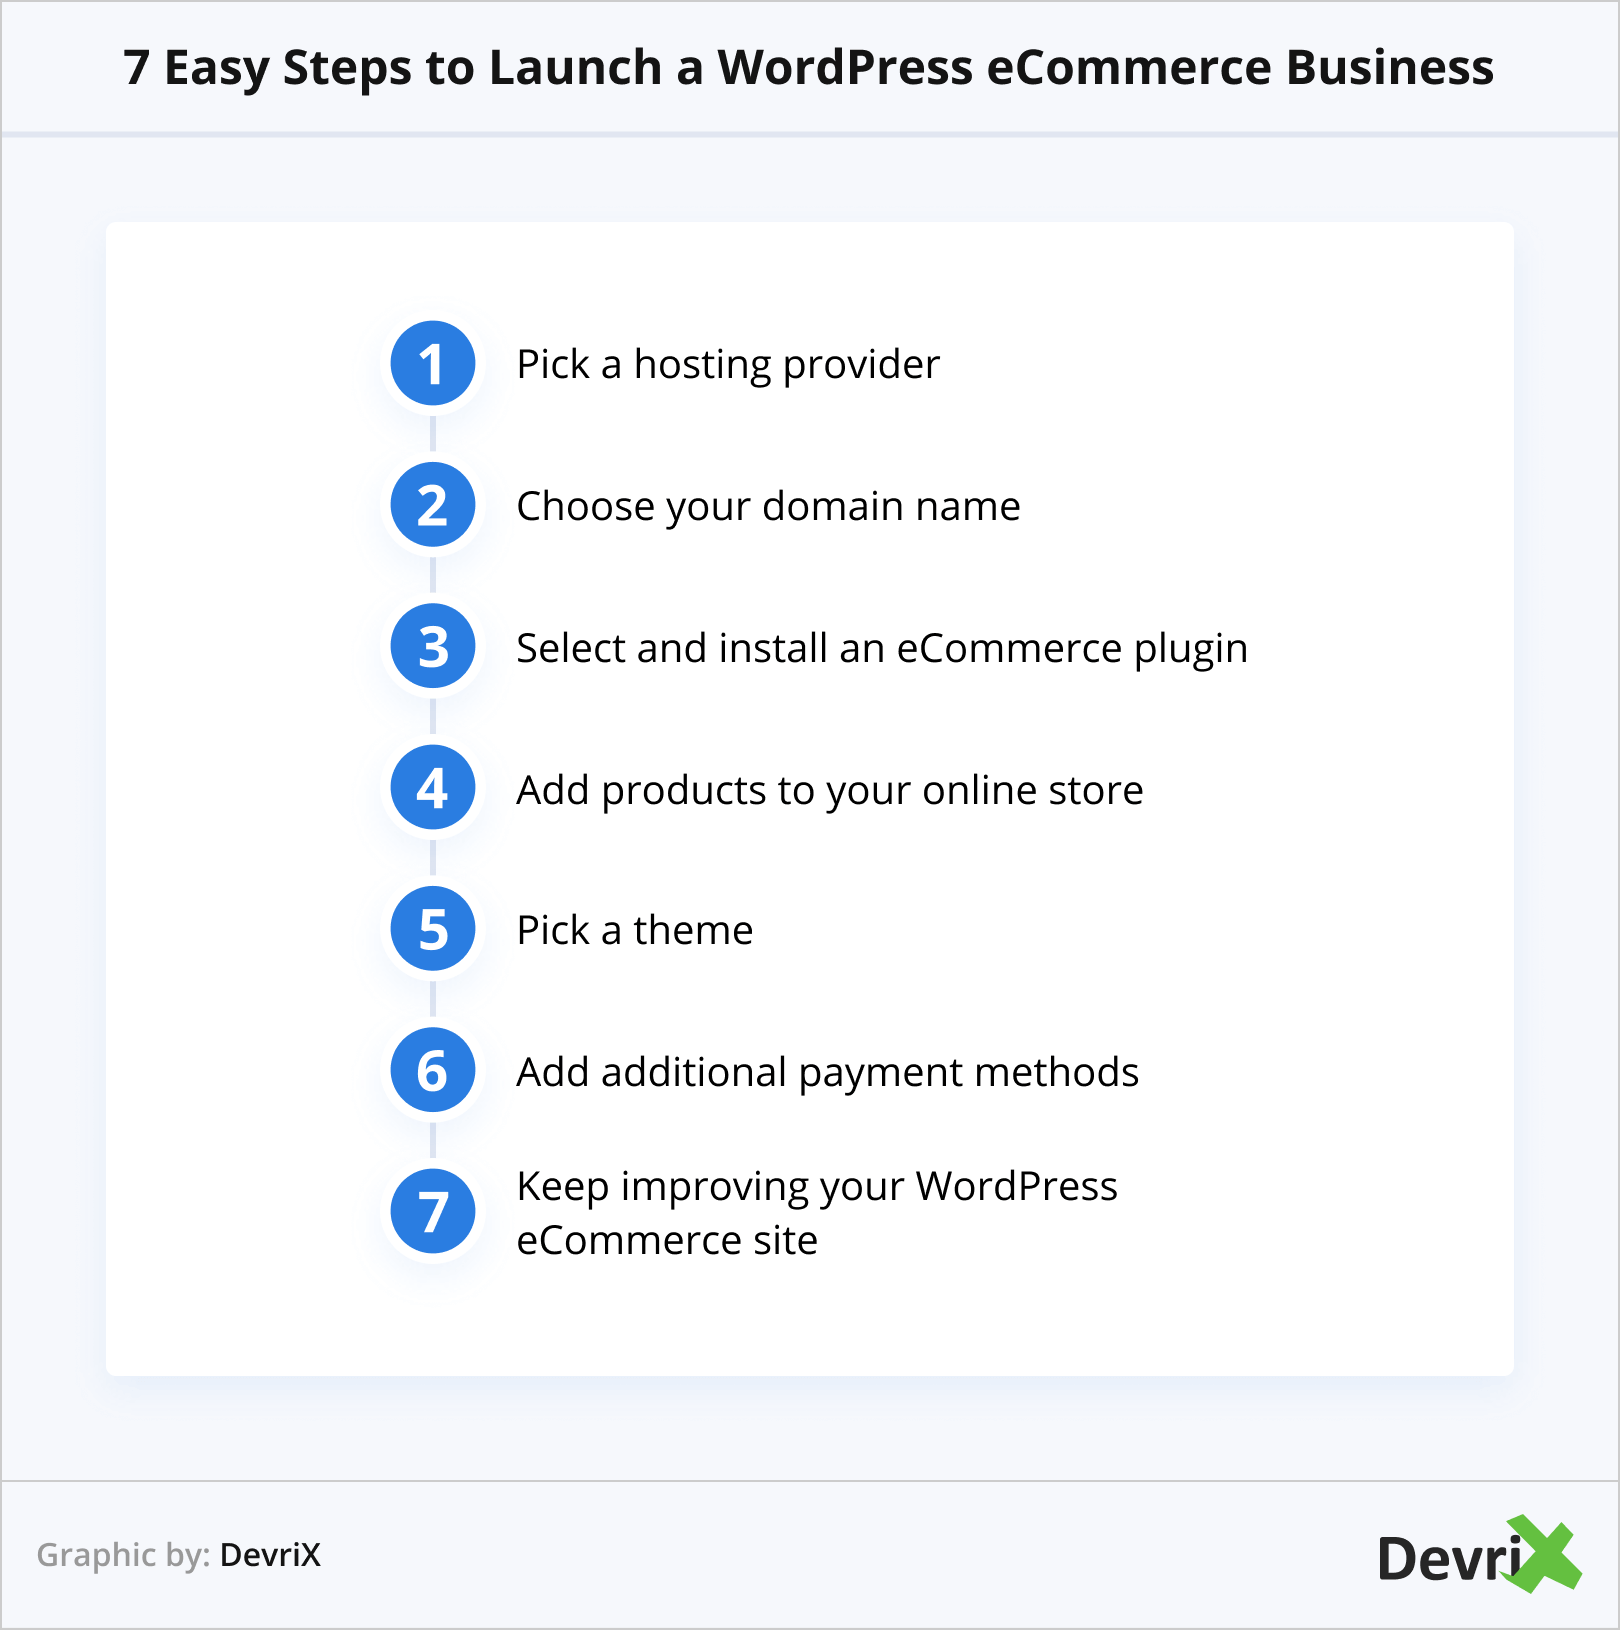 7 Easy Steps to Launch a WordPress eCommerce Business